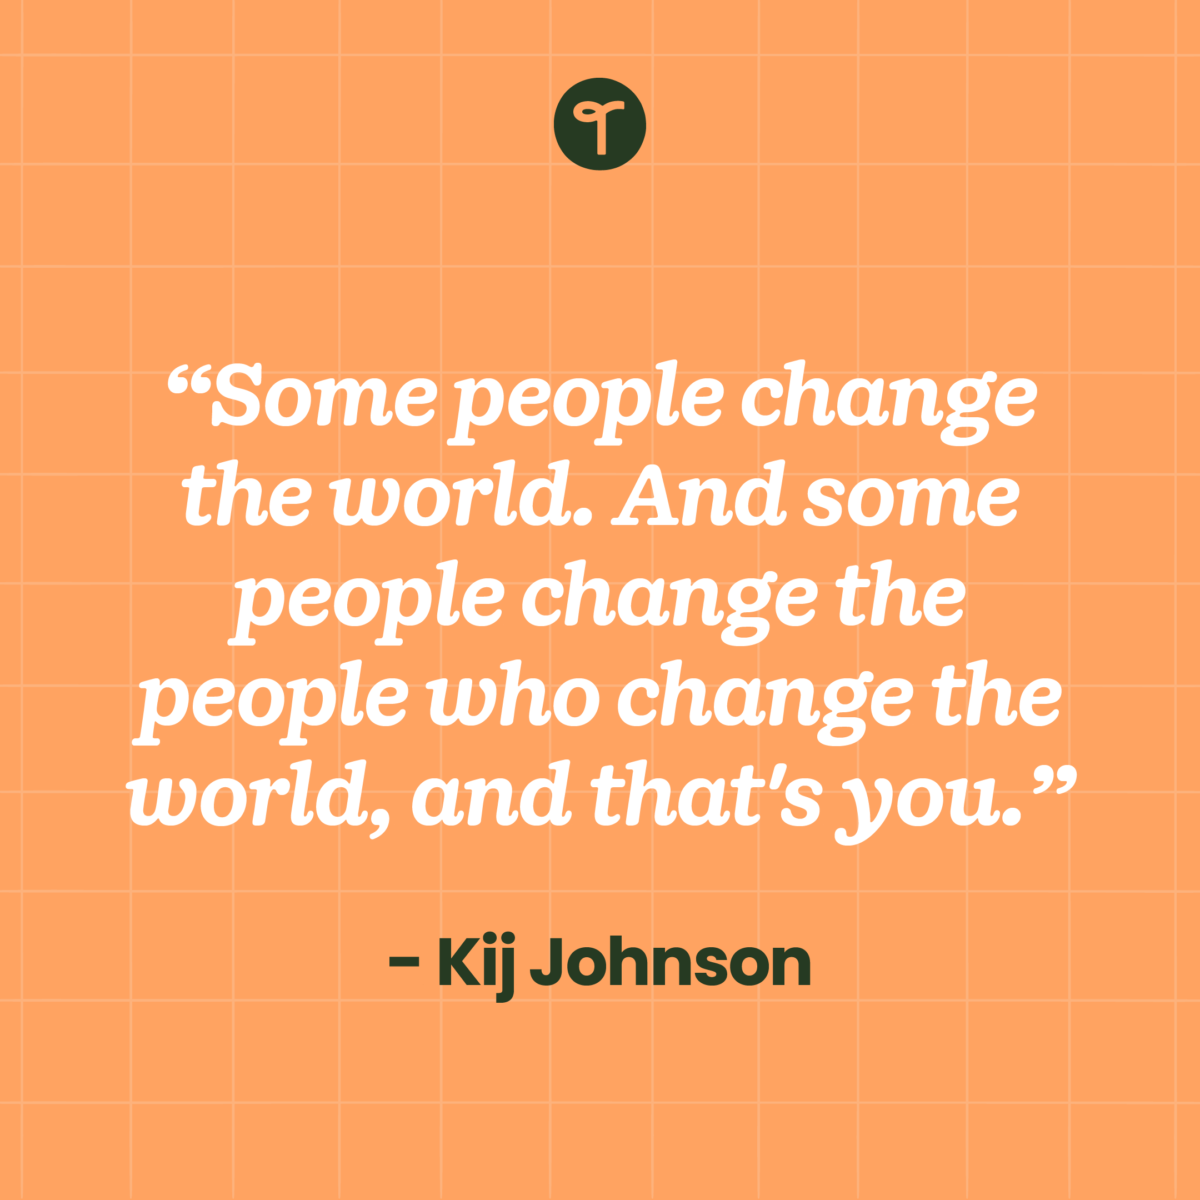 inspirational teacher quote “Some people change the world. And some people change the people who change the world, and that's you.” ― Kij Johnson